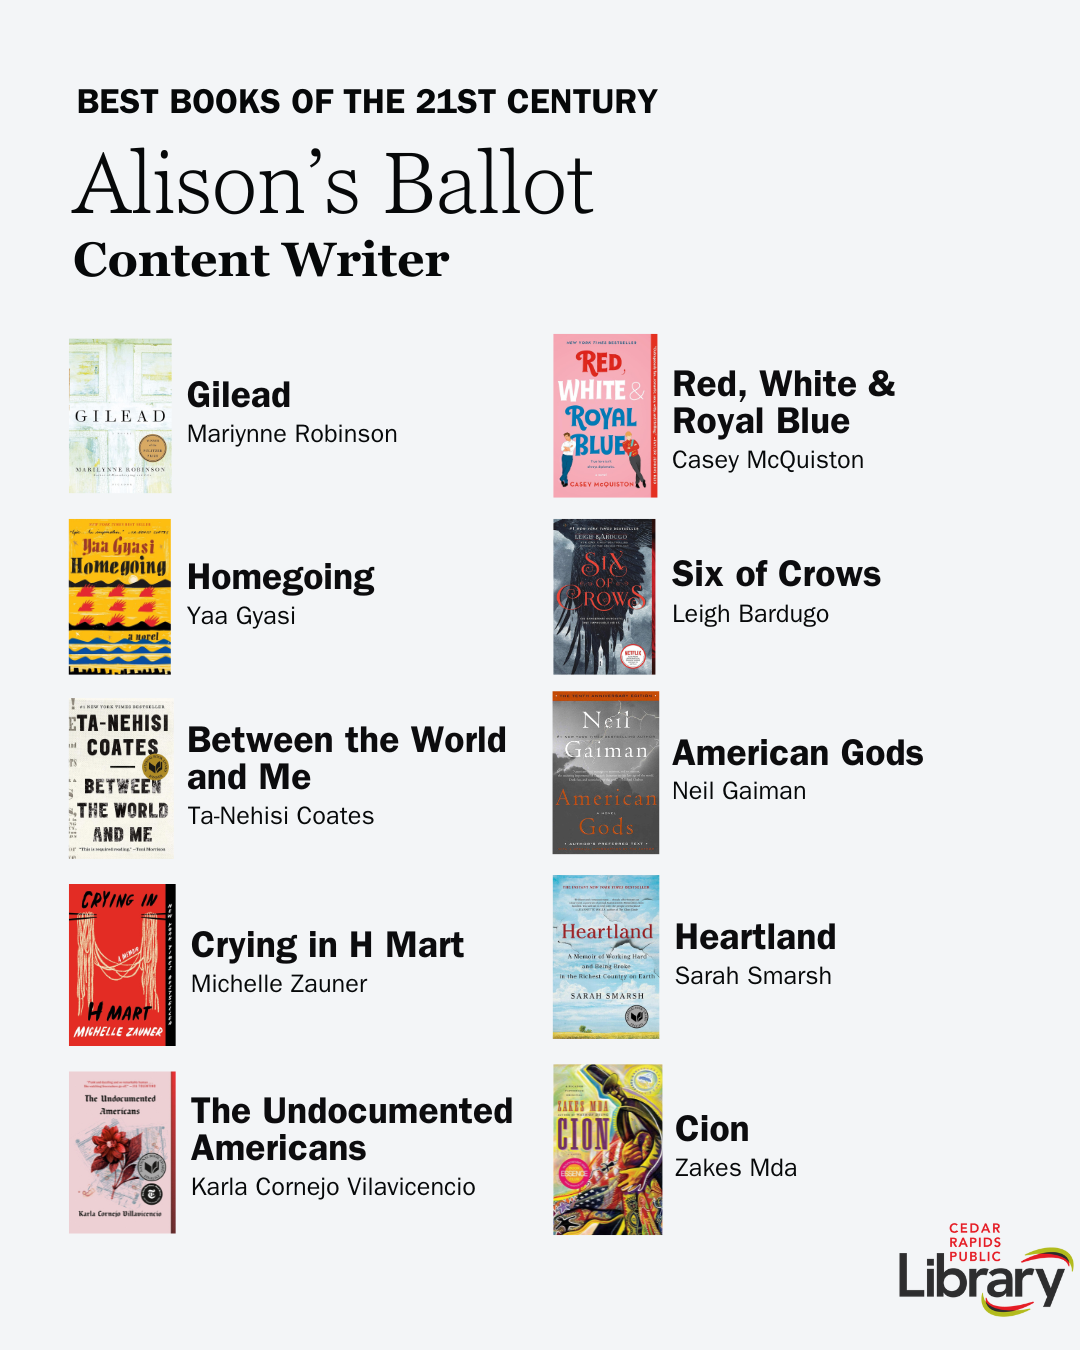 A graphic shows Content Writer Alison's Ballot for Best Books of the 21st Century